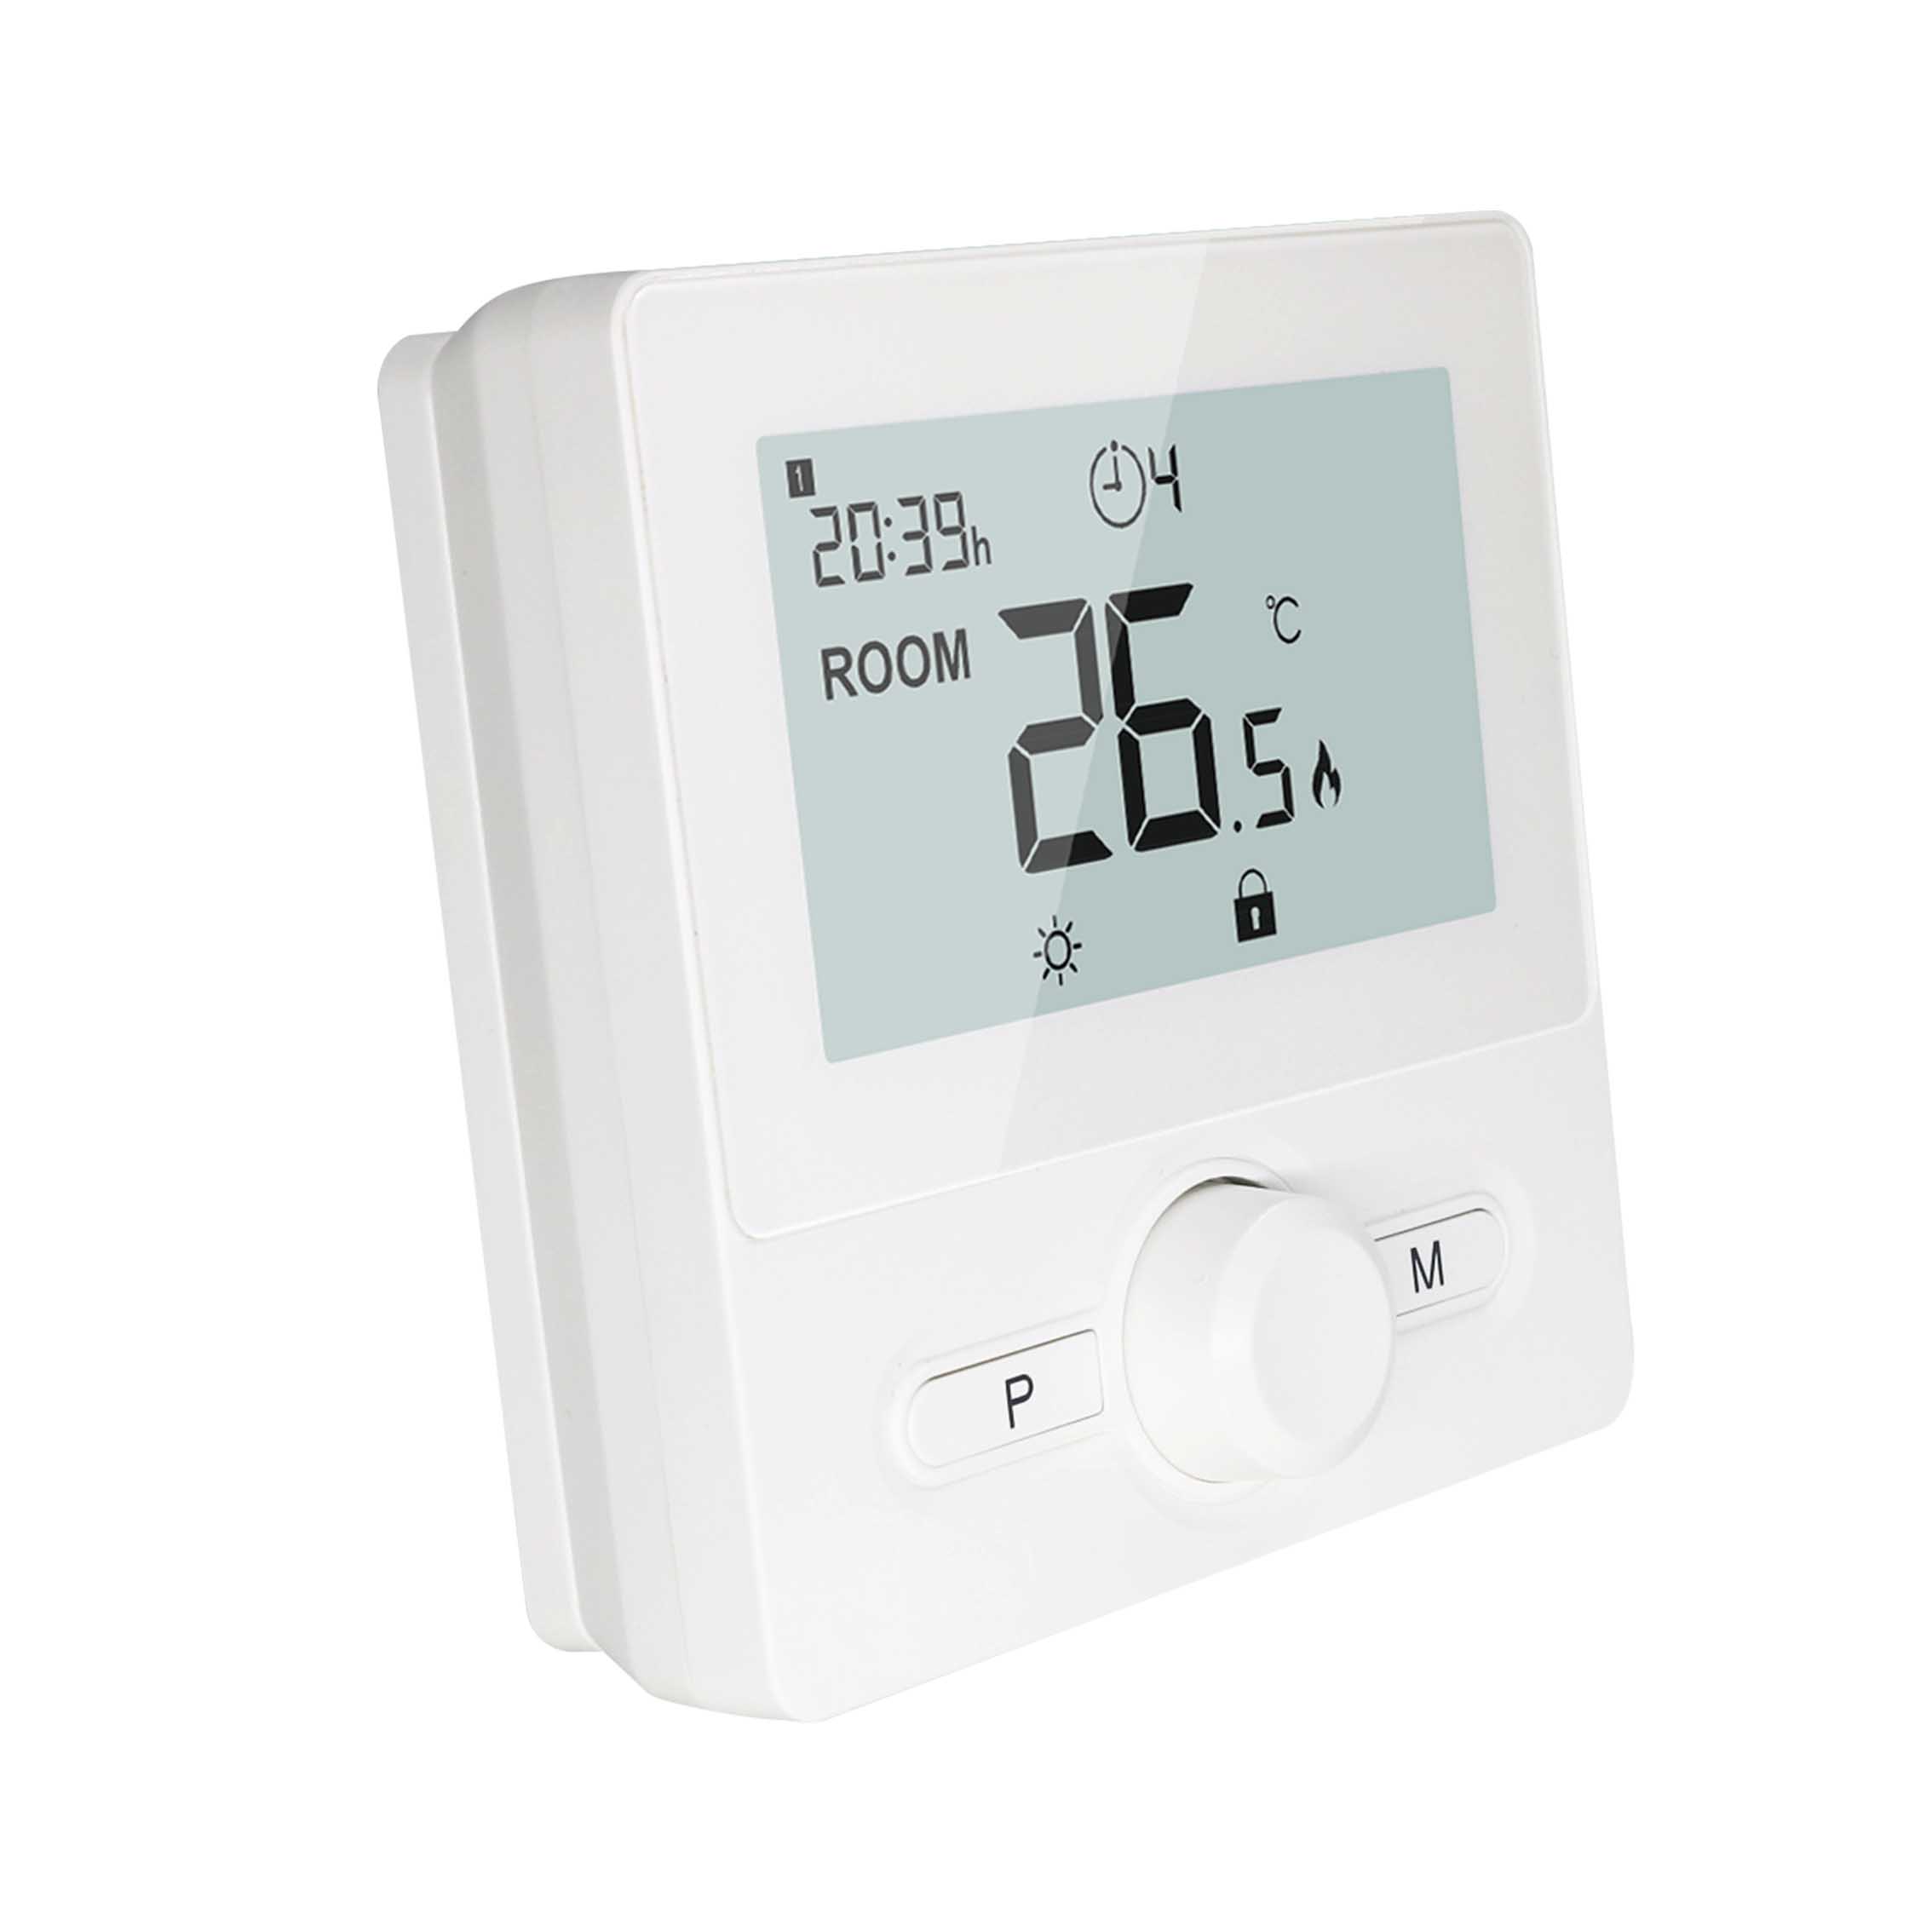 Wireless 433MHz Opentherm Boiler Heating Thermostat